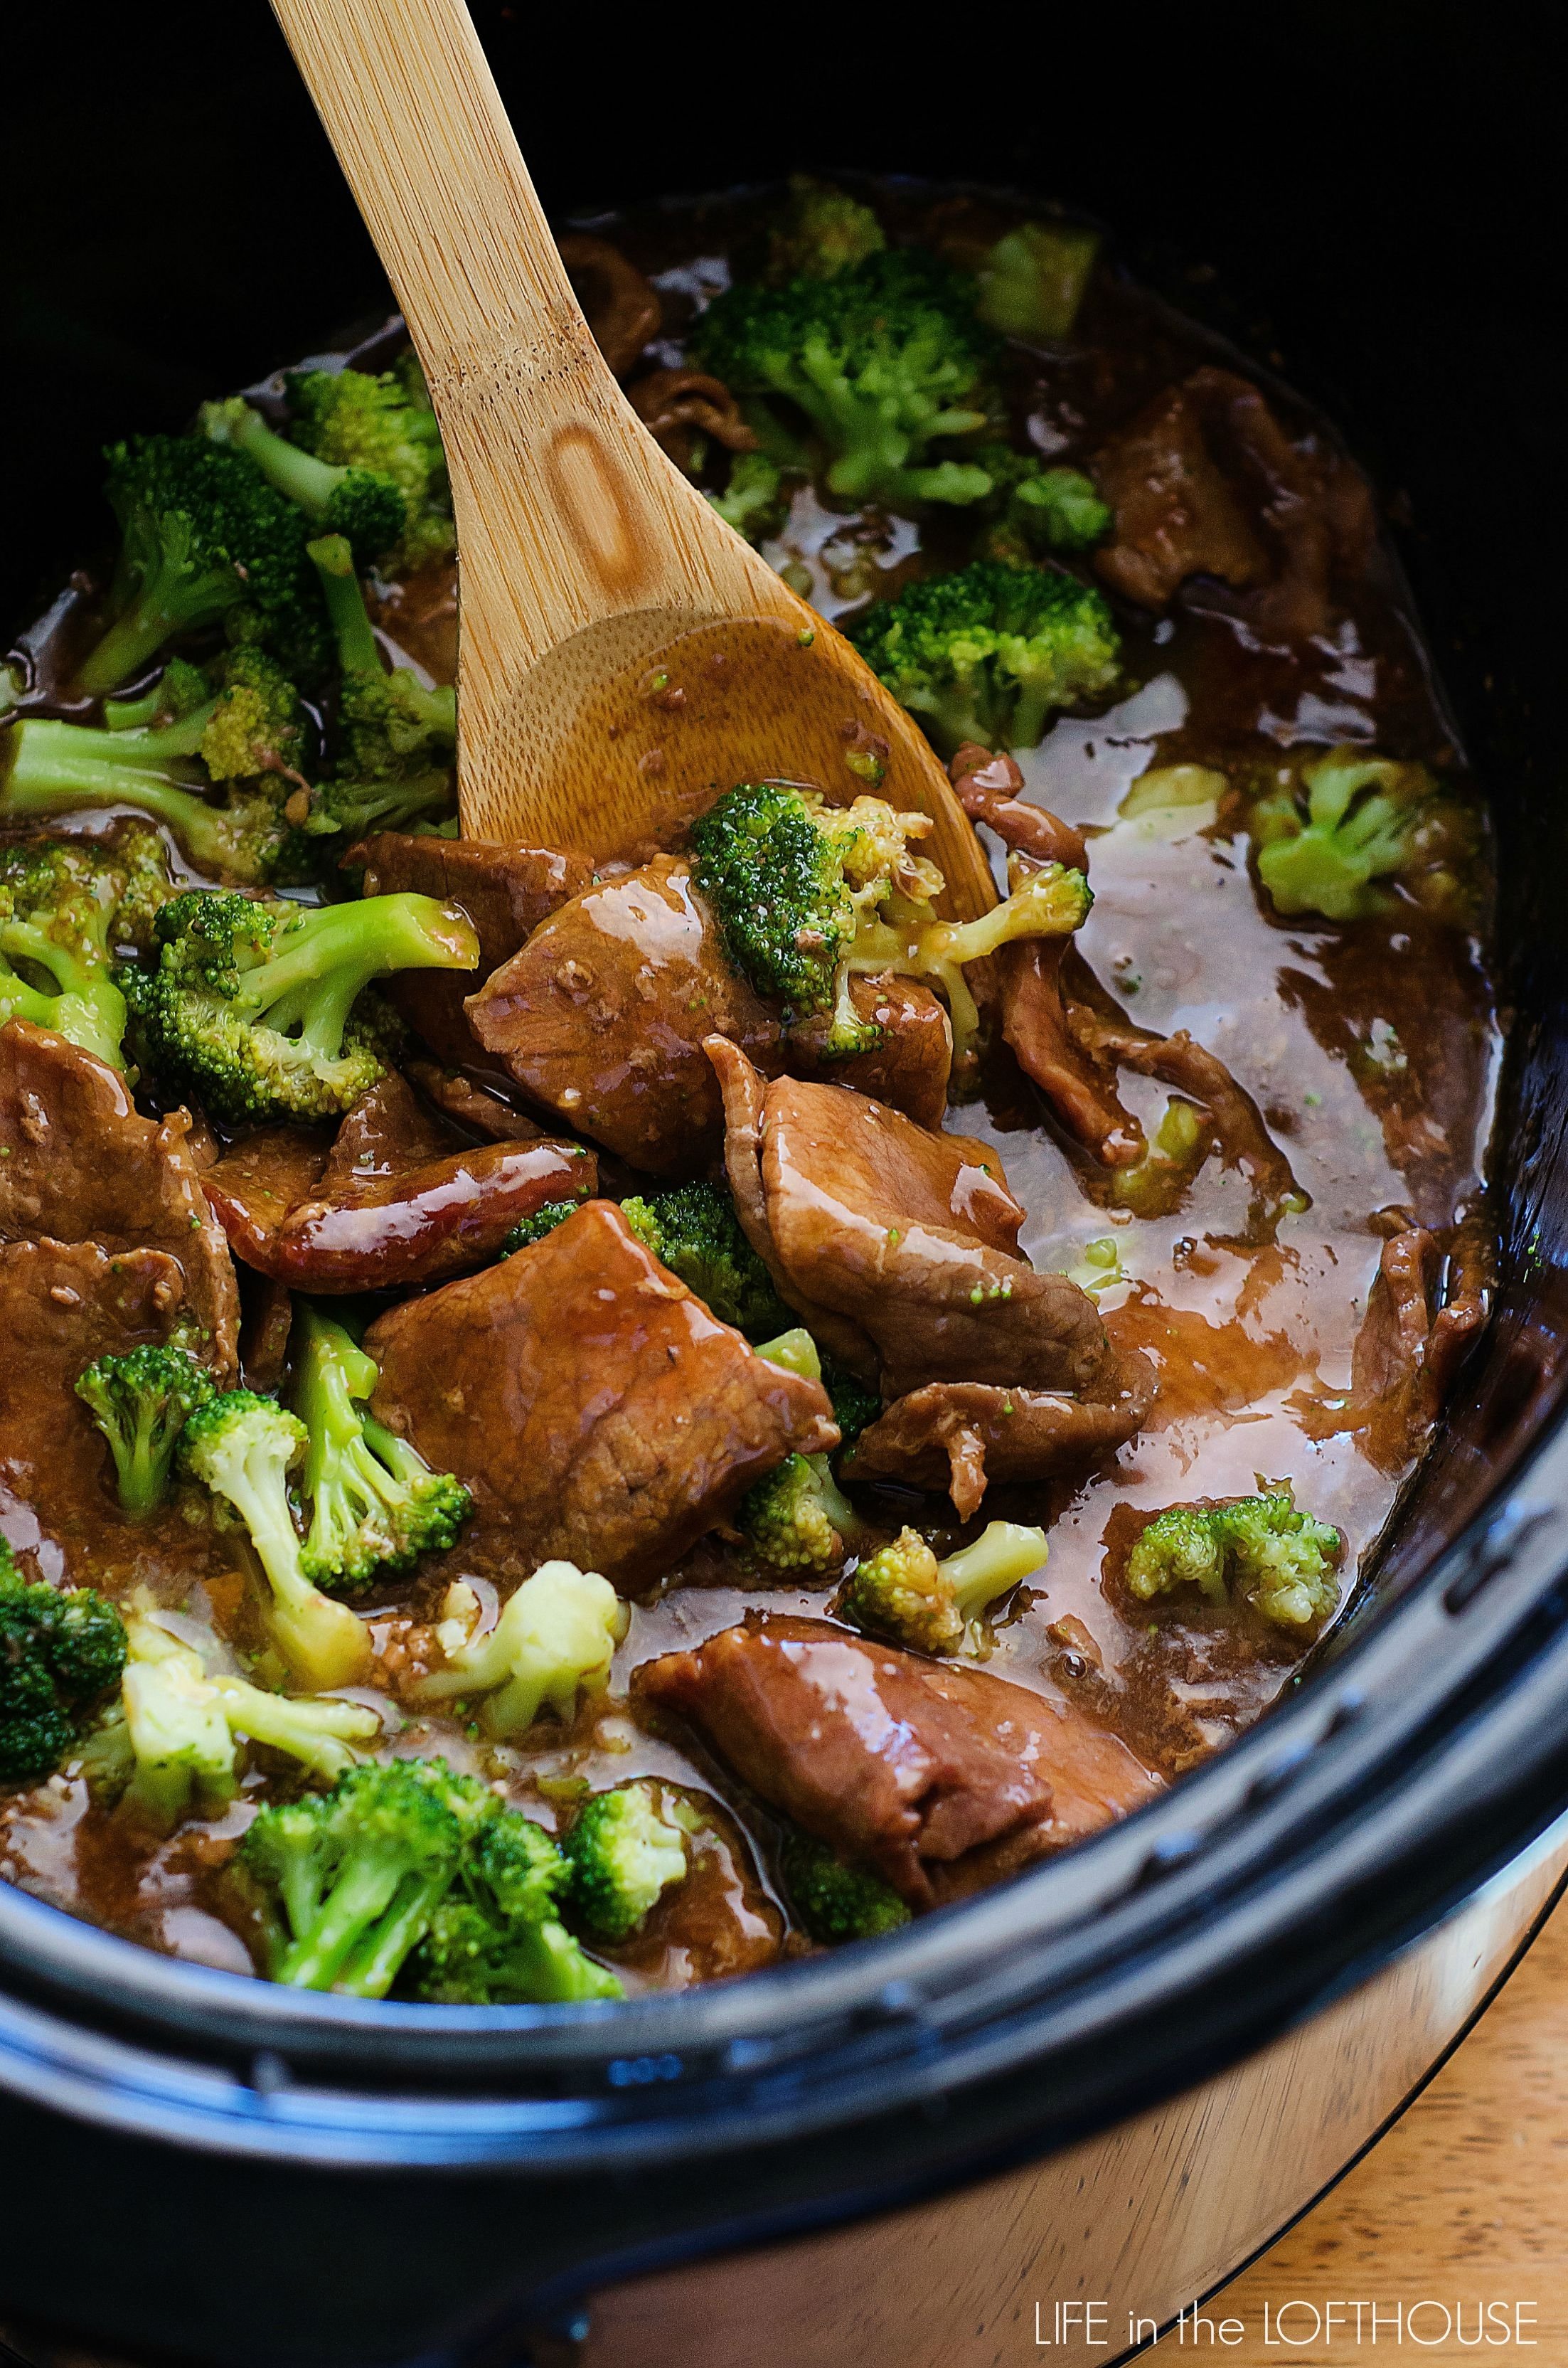 10 Stylish Ideas For Crock Pot Meals crock pot beef and broccoli 1 2022